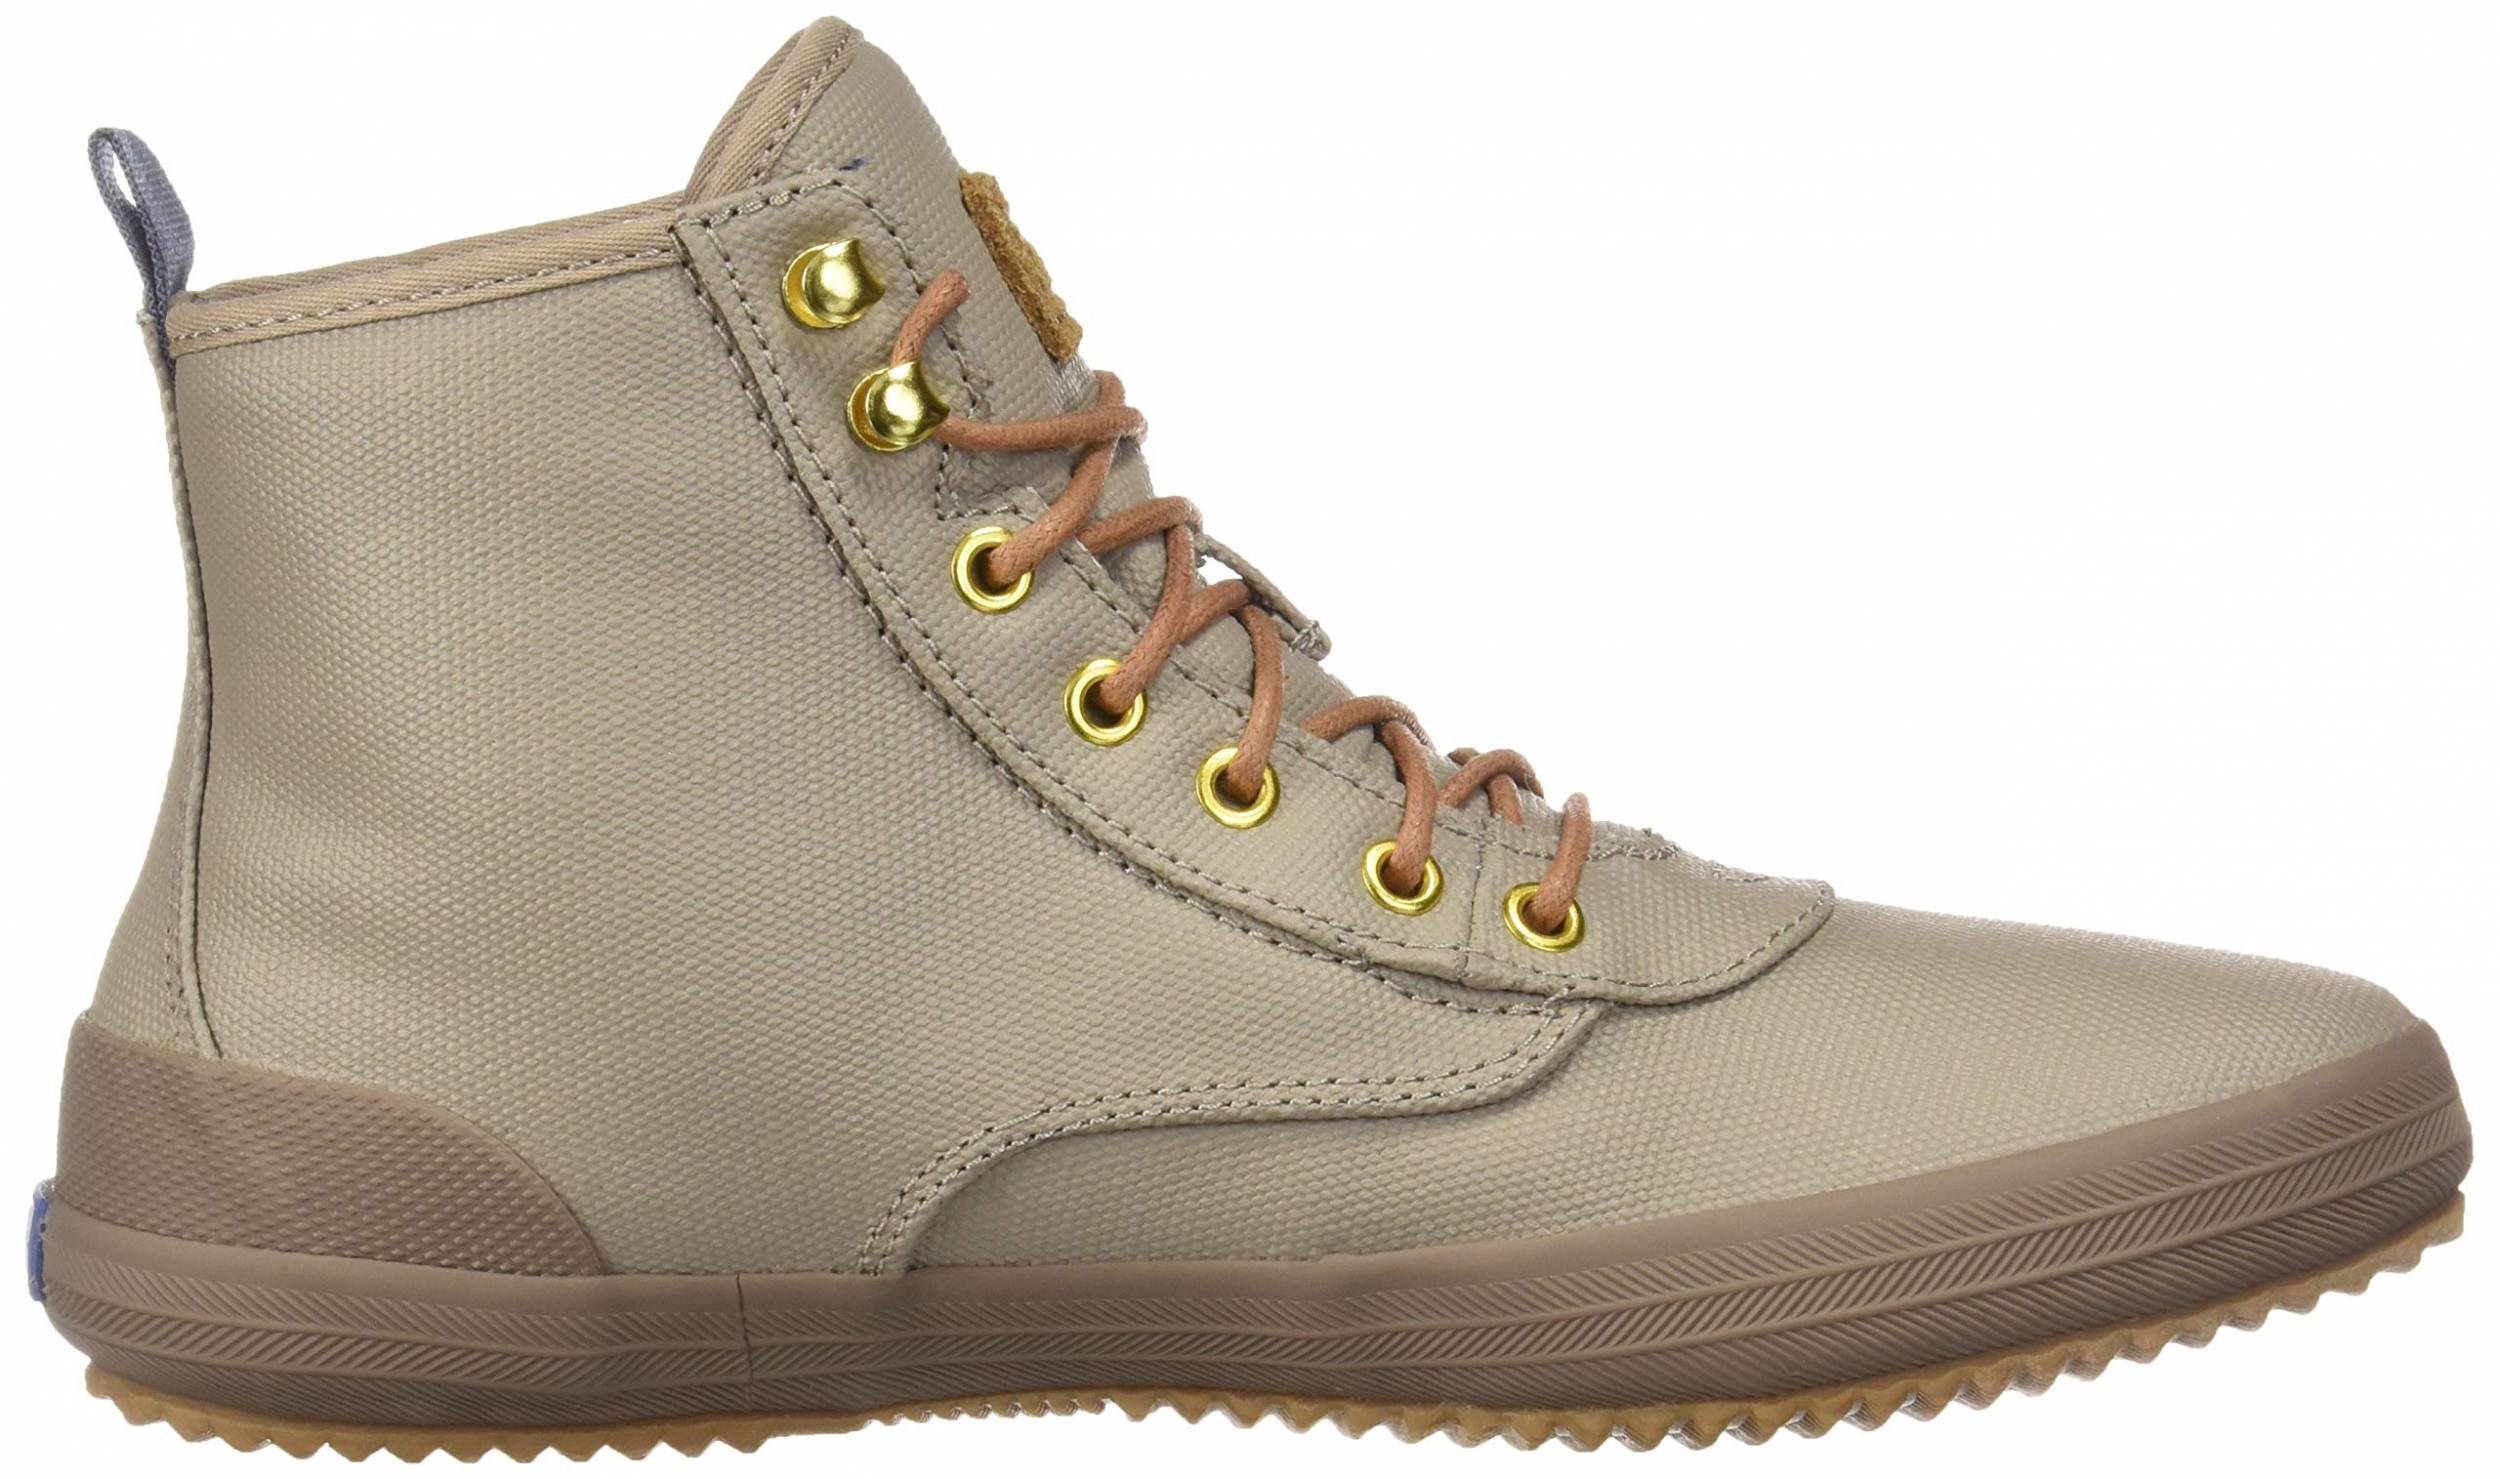 ked scout boot